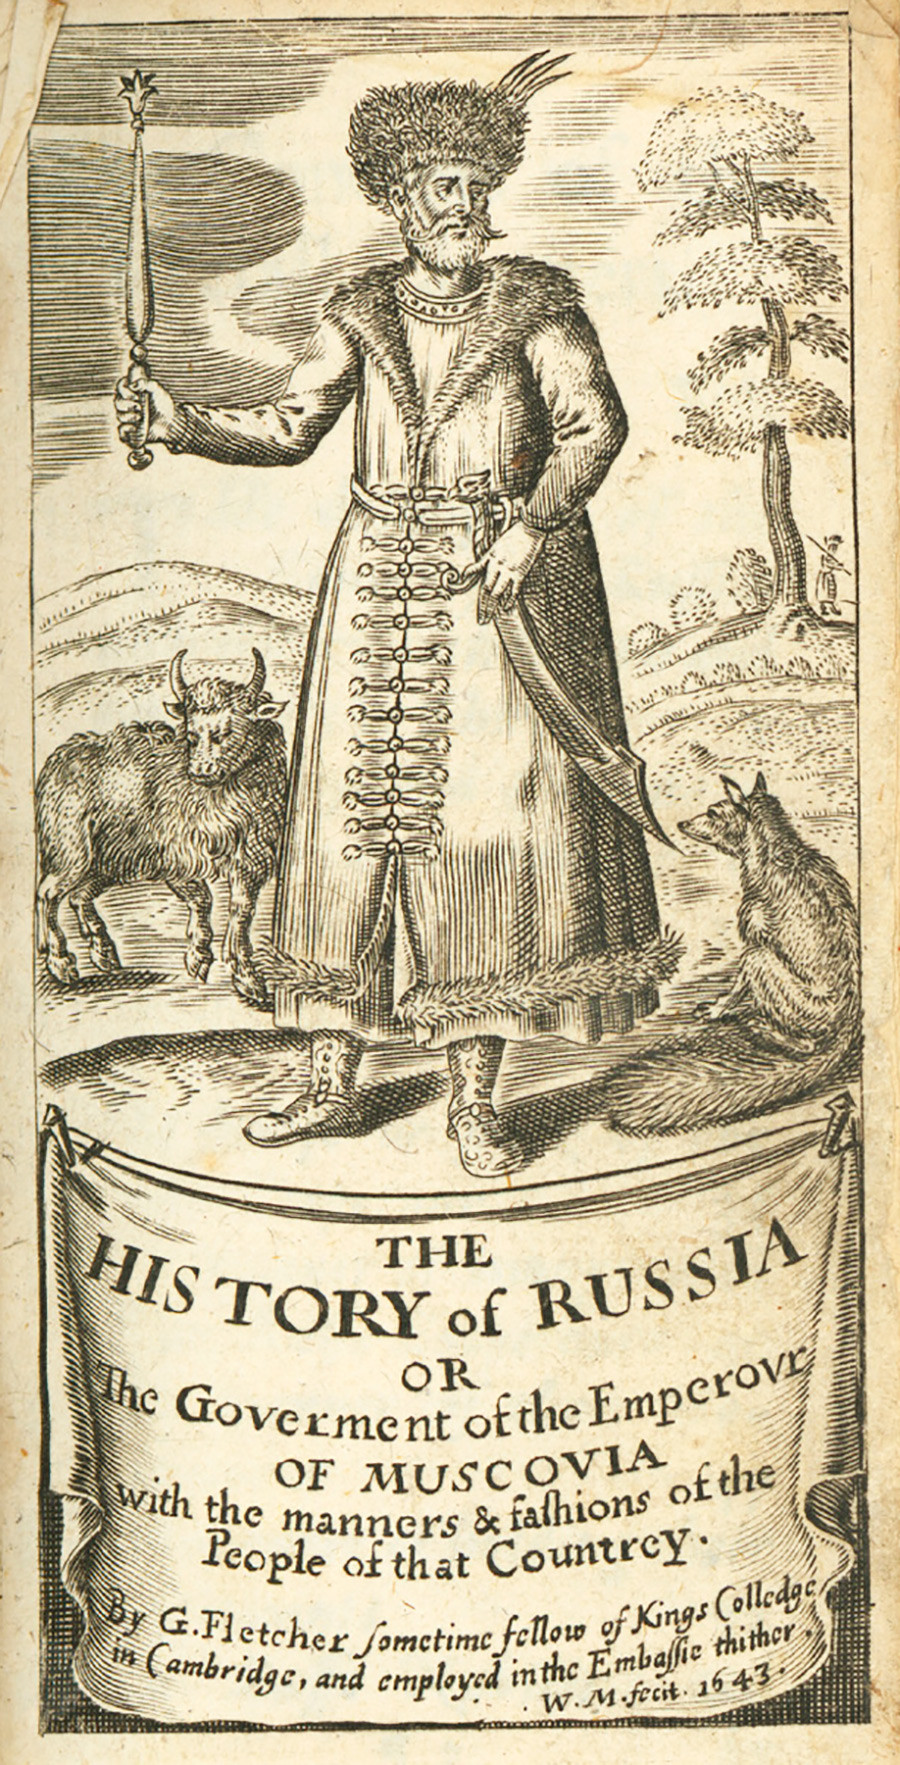 Giles Fletcher 'The history of Russia' titlepage, 2nd Ed. (1643).